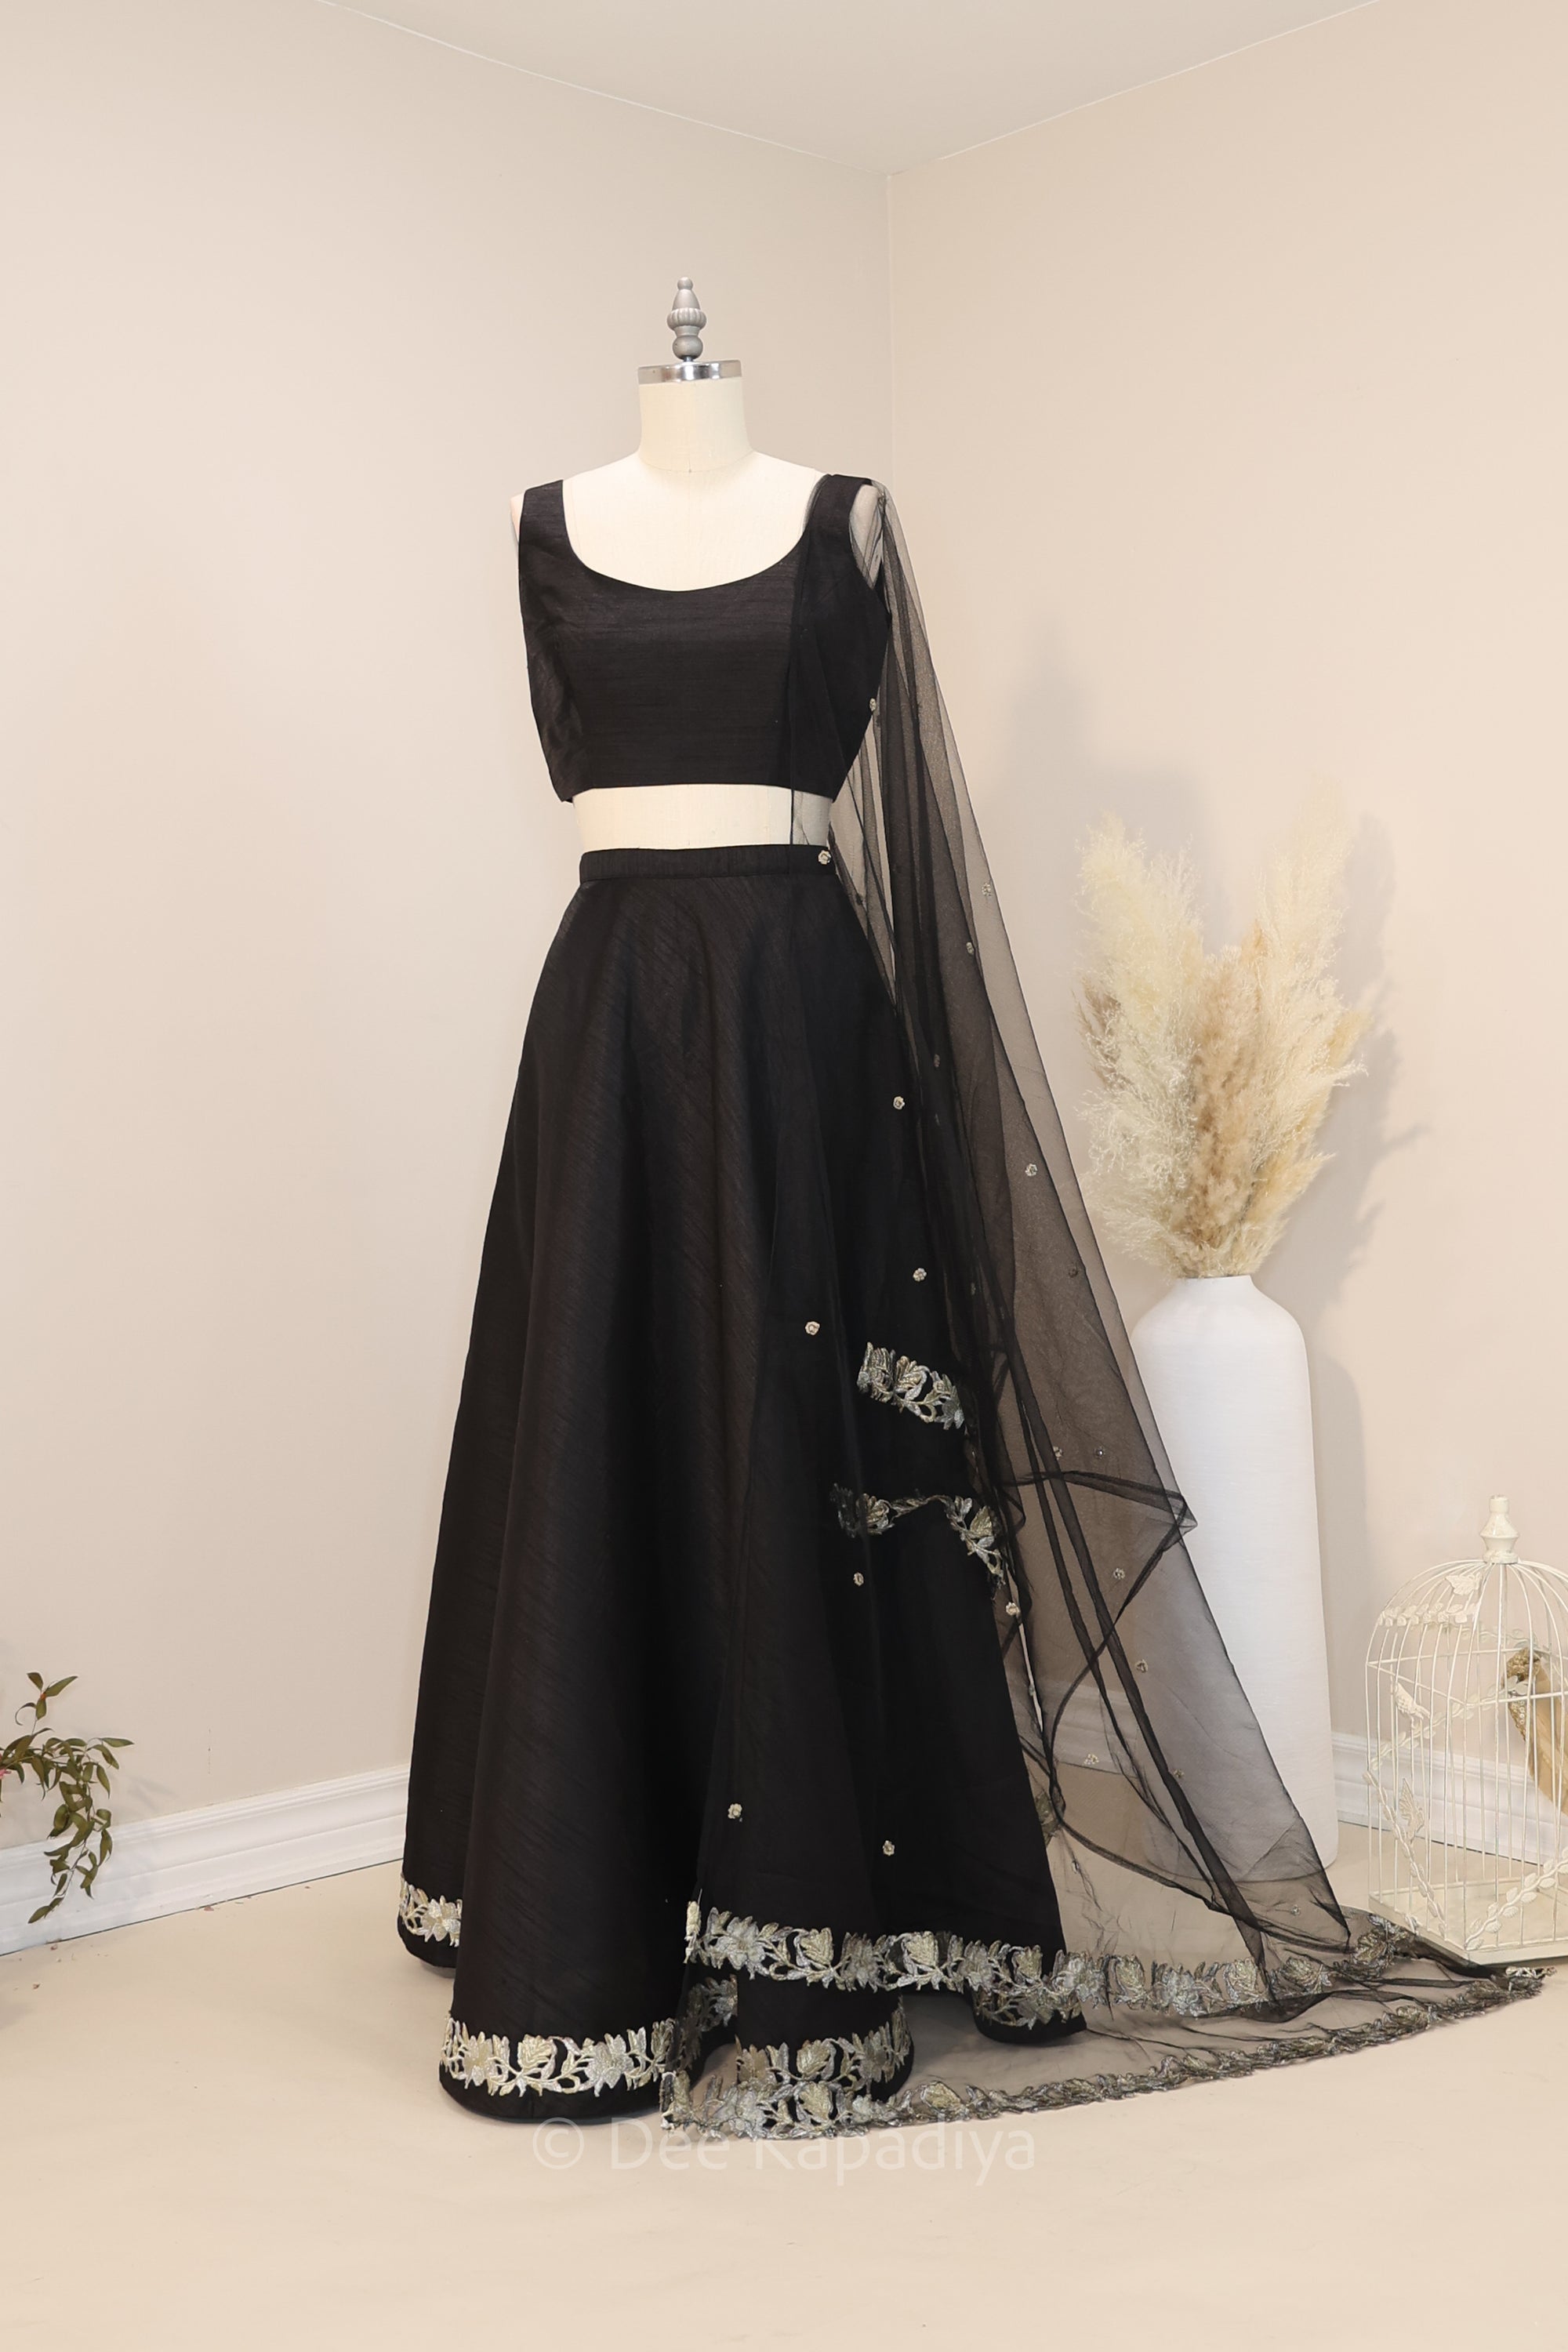 DUA BLACK LEHENGA SET - perfect for wedding guest in classic style and versatile